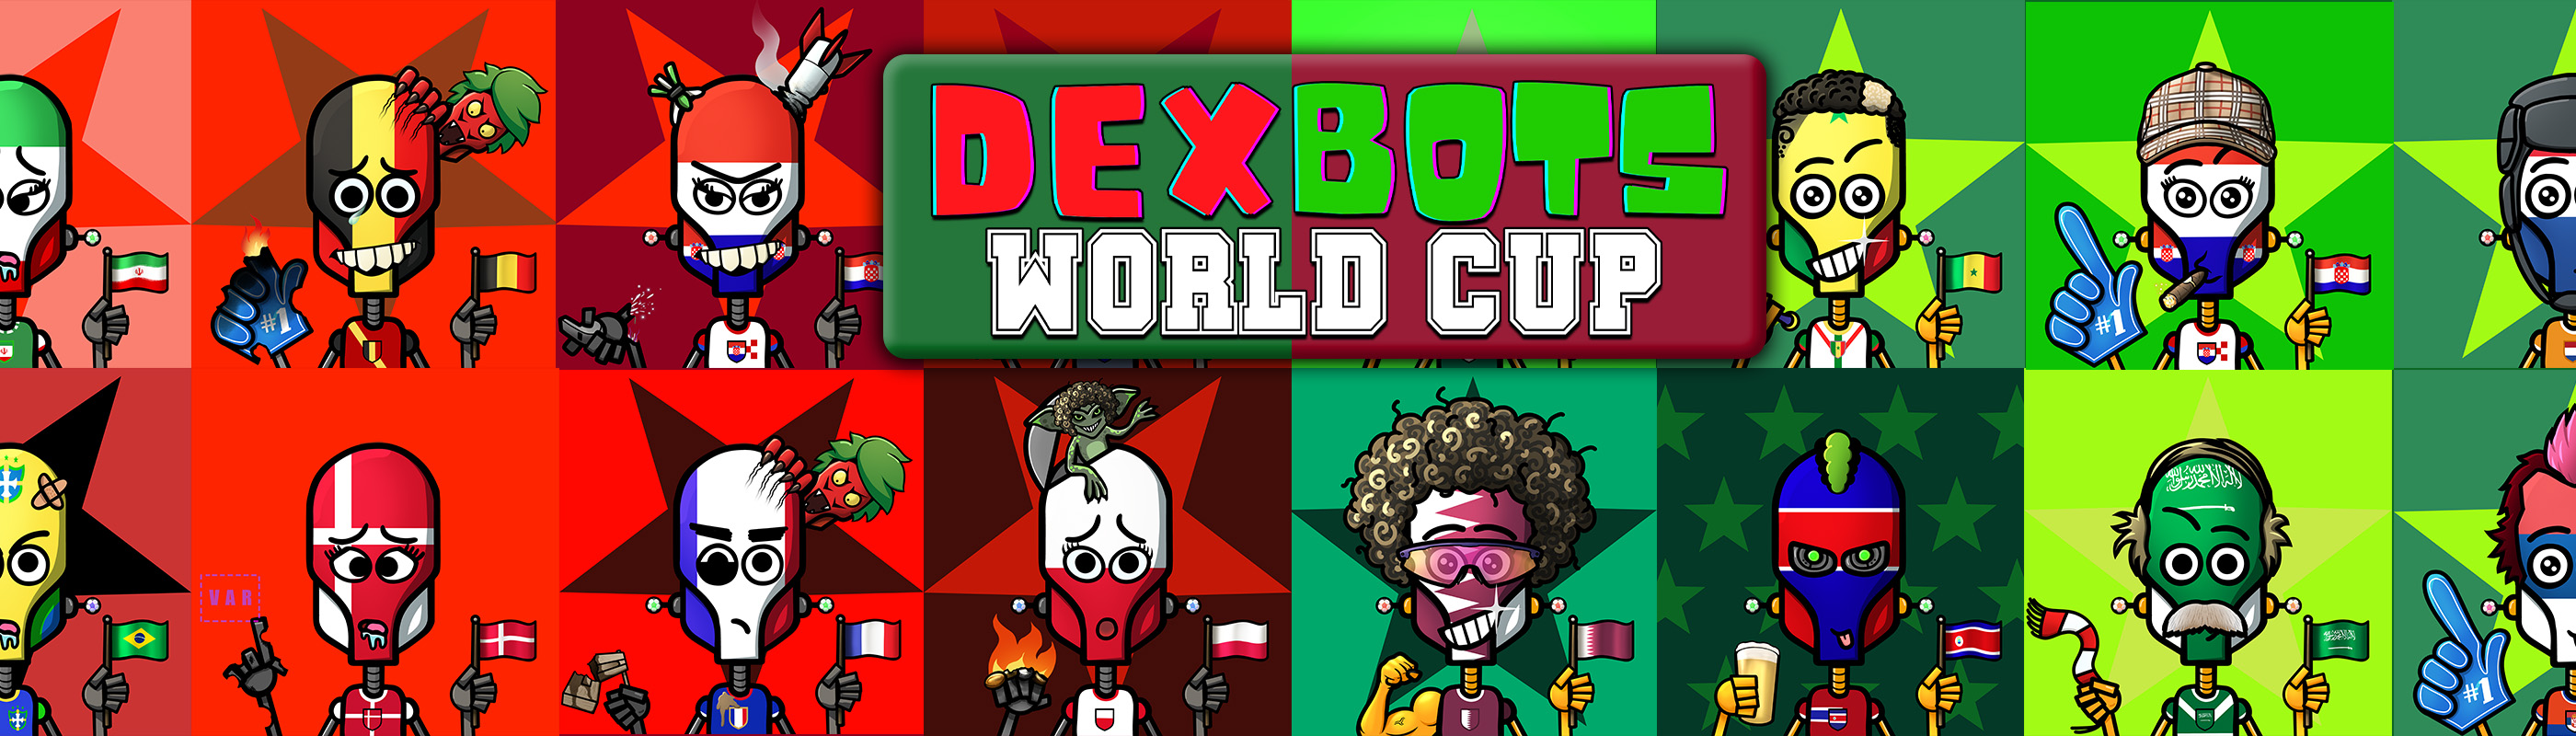 Dexbots World Cup